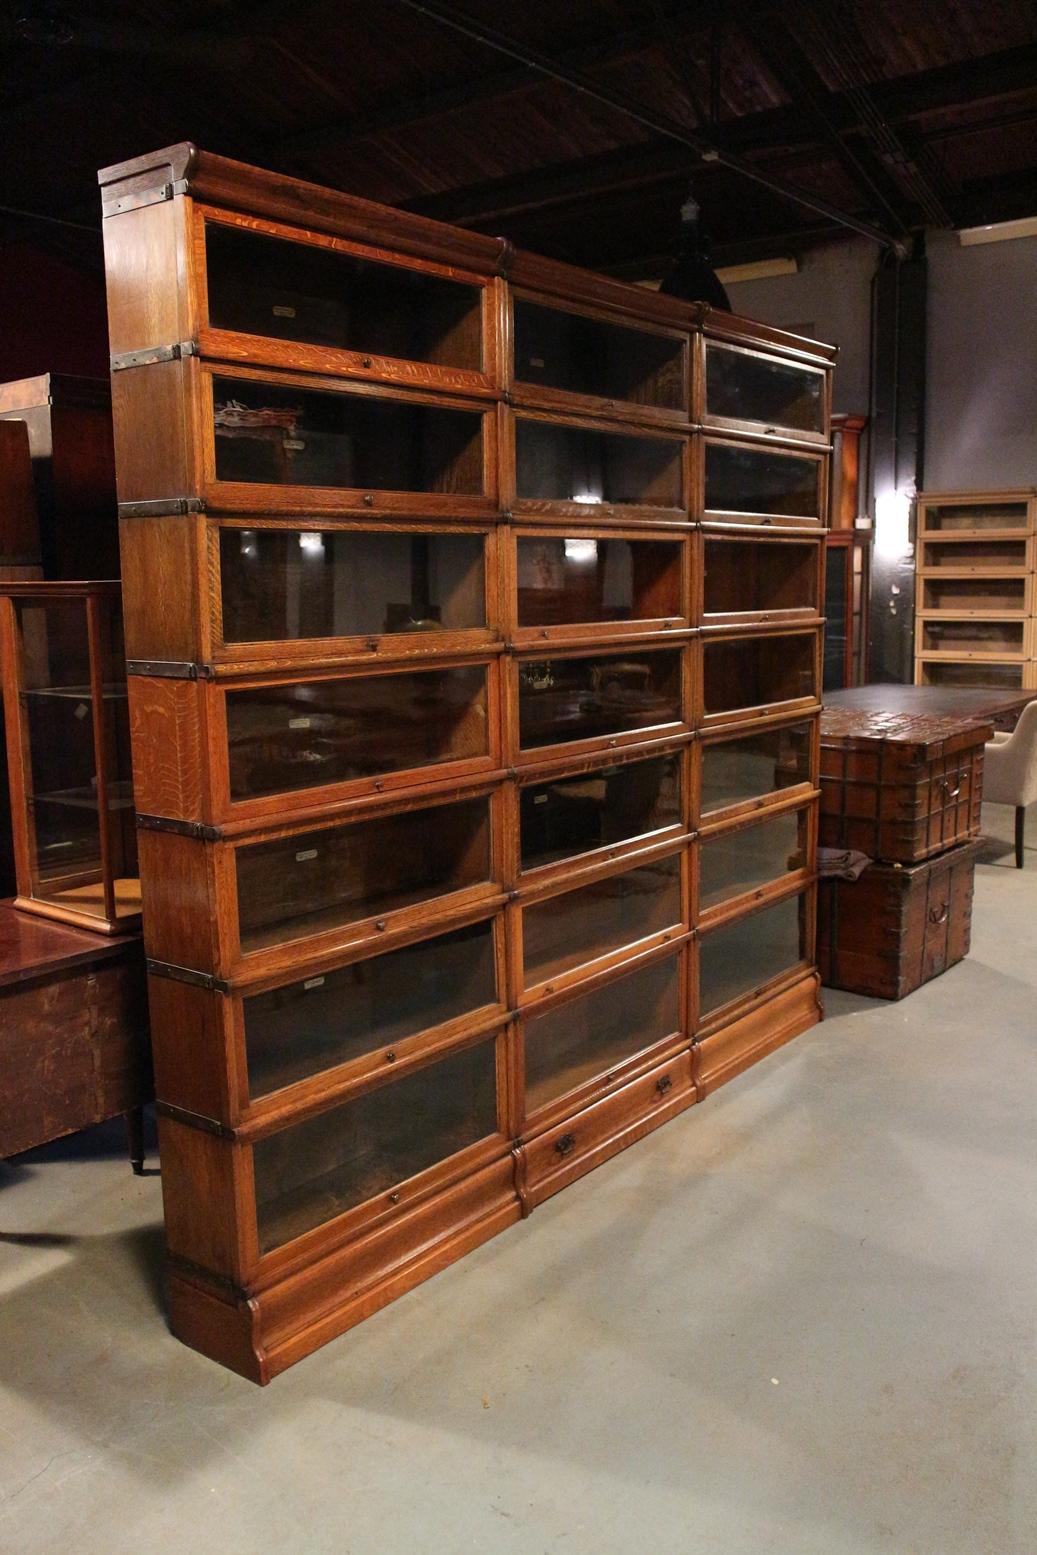 Beautiful large oak globe Wernicke bookcase in perfect condition. Nice light warm color.
The bookcase consists of 21 stackable parts.

Origin: England

Period: circa 1895-1910.

Measures: W 260cm, D 25cm, H 230cm.